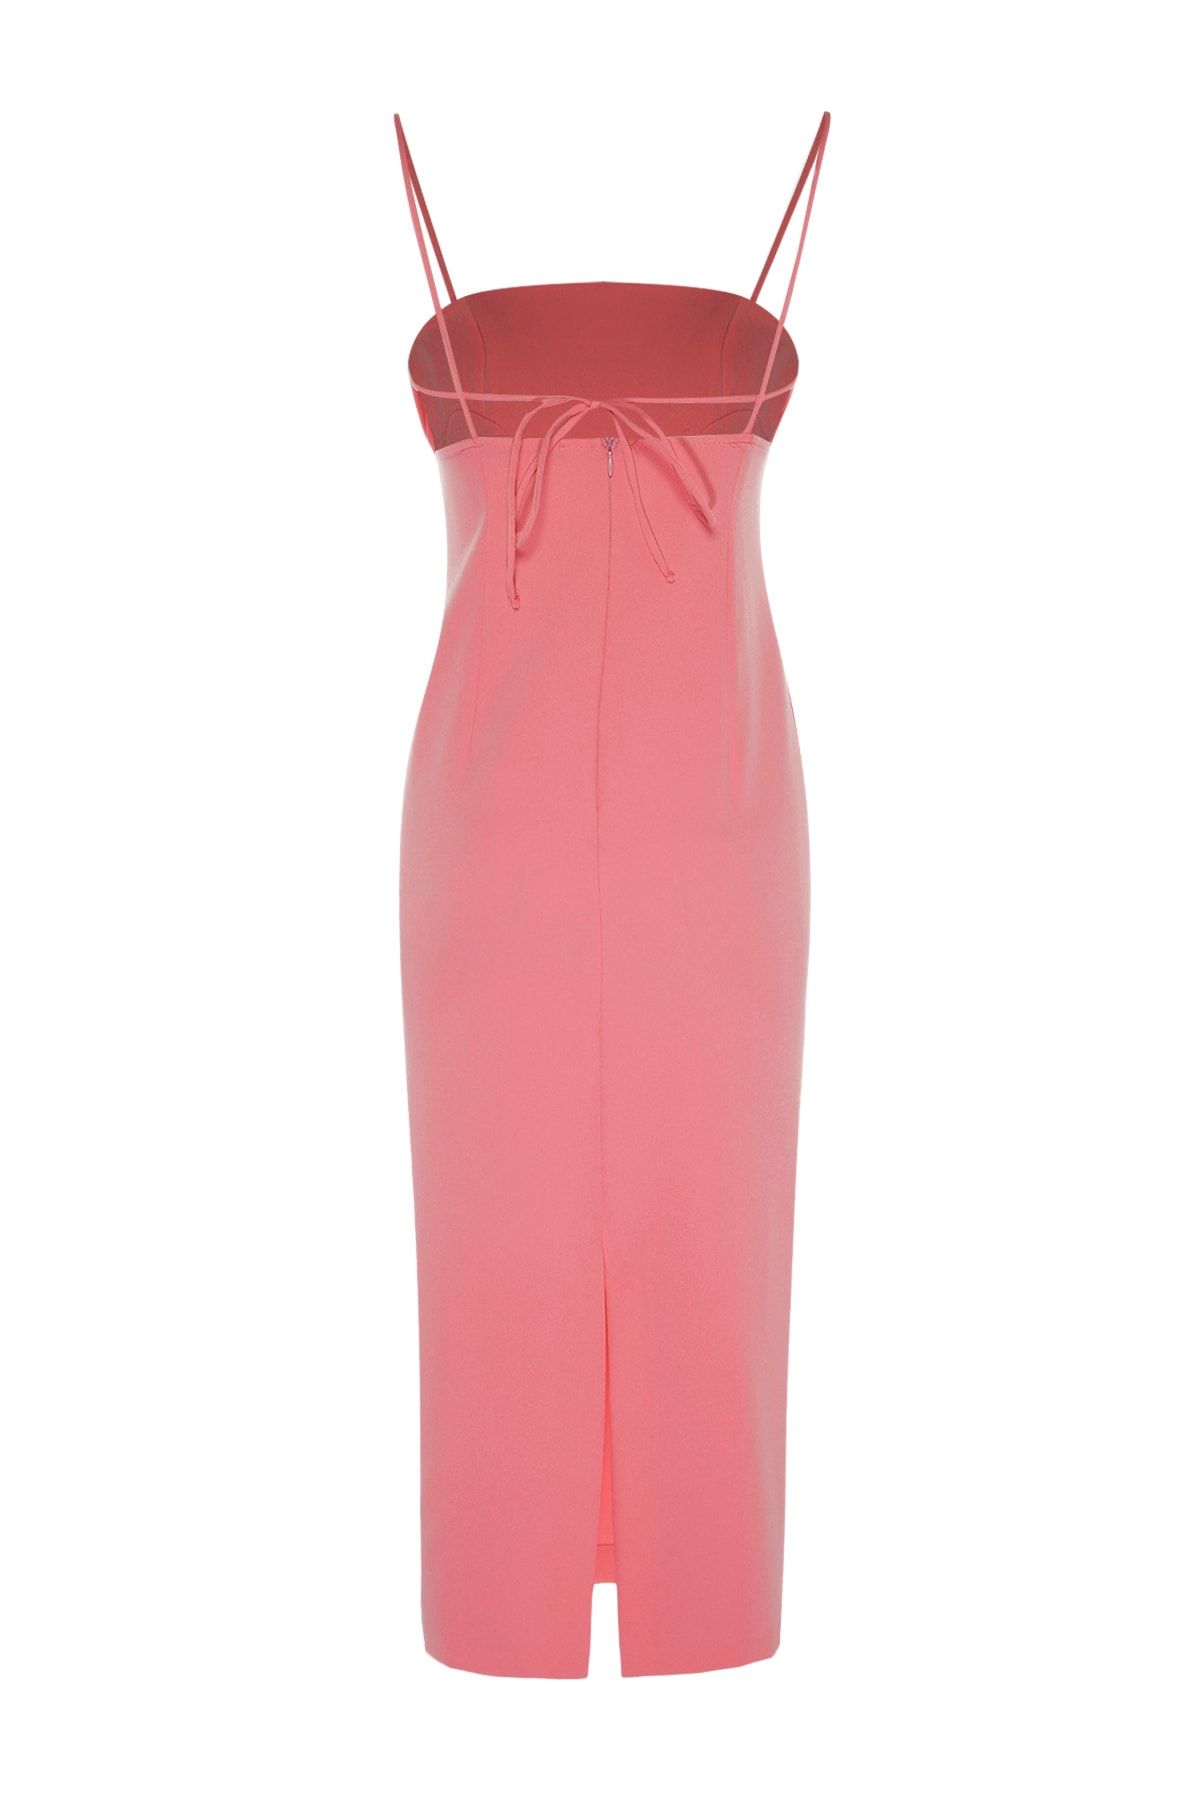 Trendyol Collection Light Pink Fitted Lined Woven Evening Dress  TPRSS22EL3197